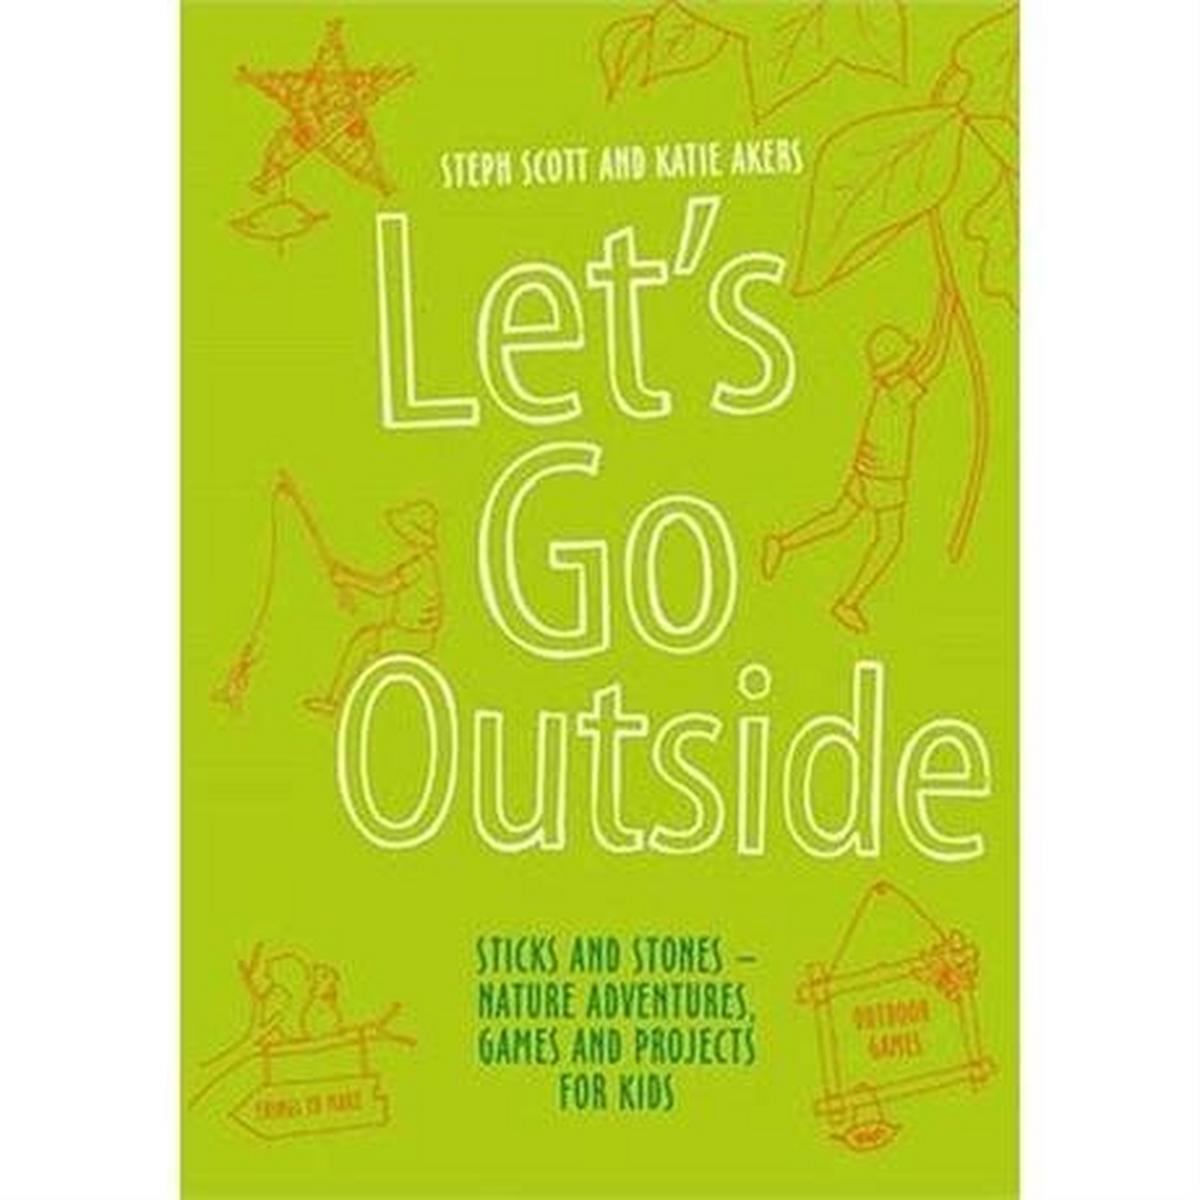 Miscellaneous Book: Let's Go Outside